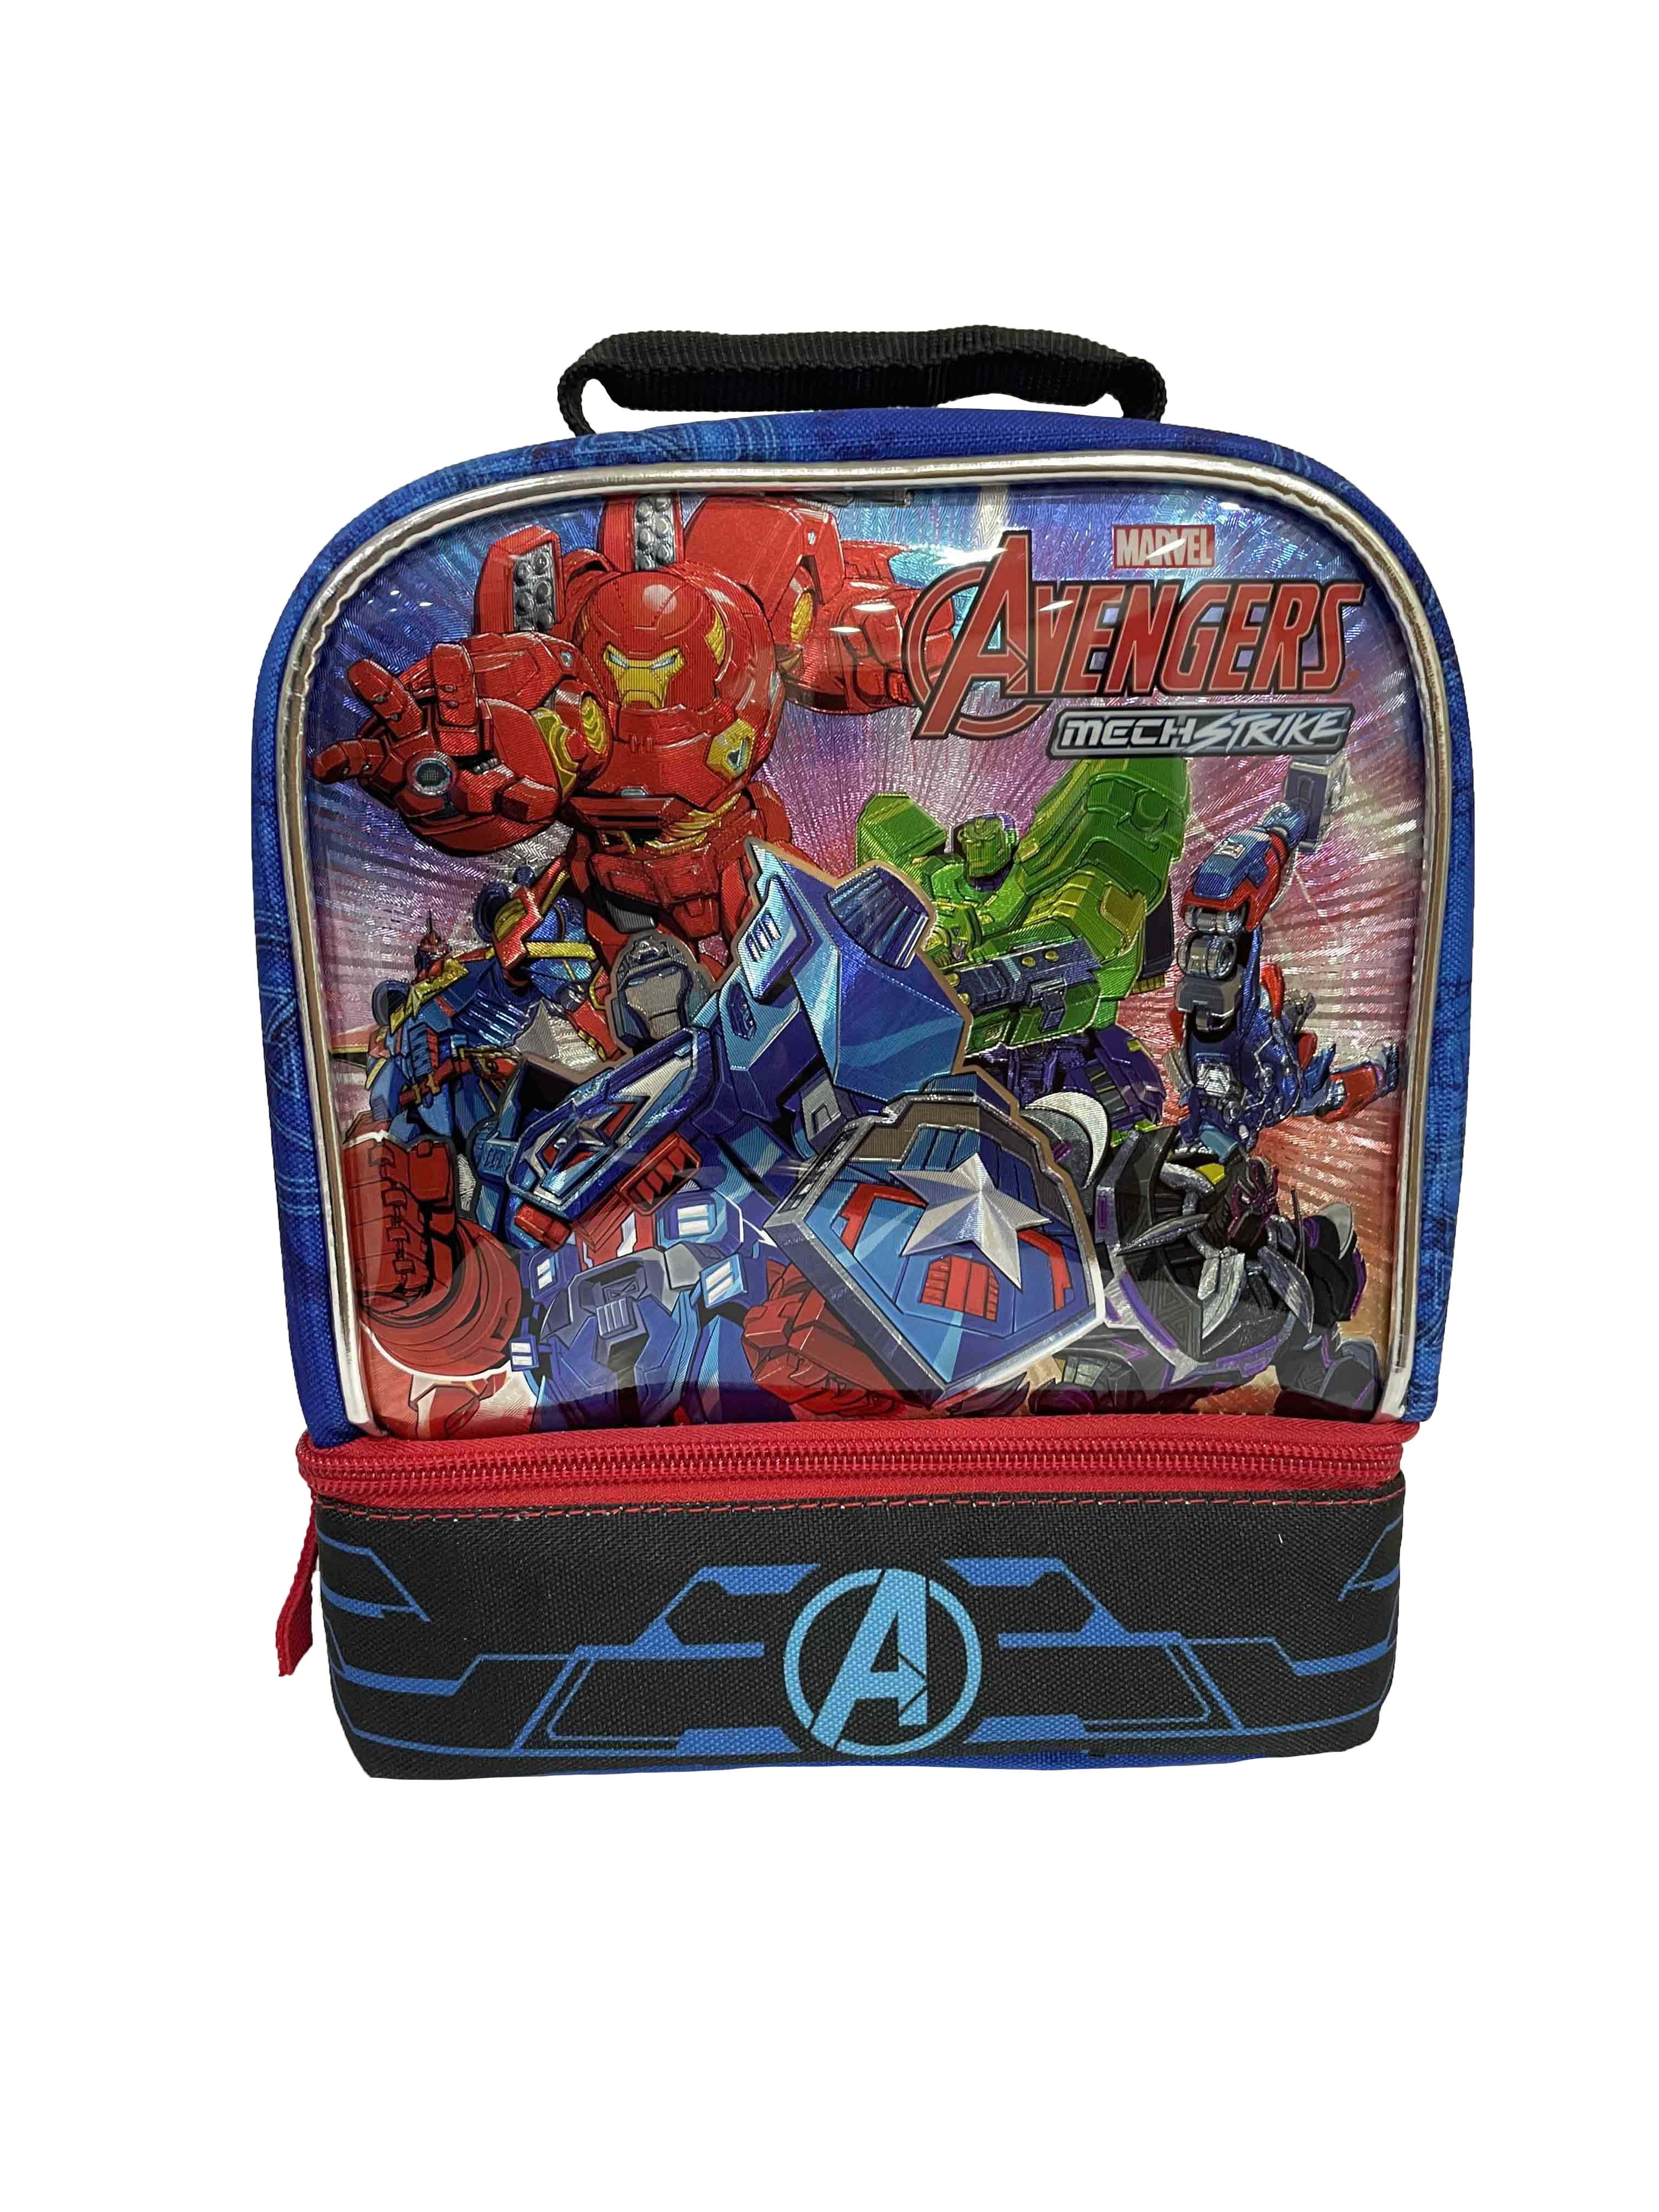 AVENGERS COMIC CHILDS SCHOOL BOYS INSULATED WIPE CLEAN LUNCH BOX BAG BOTTLE 